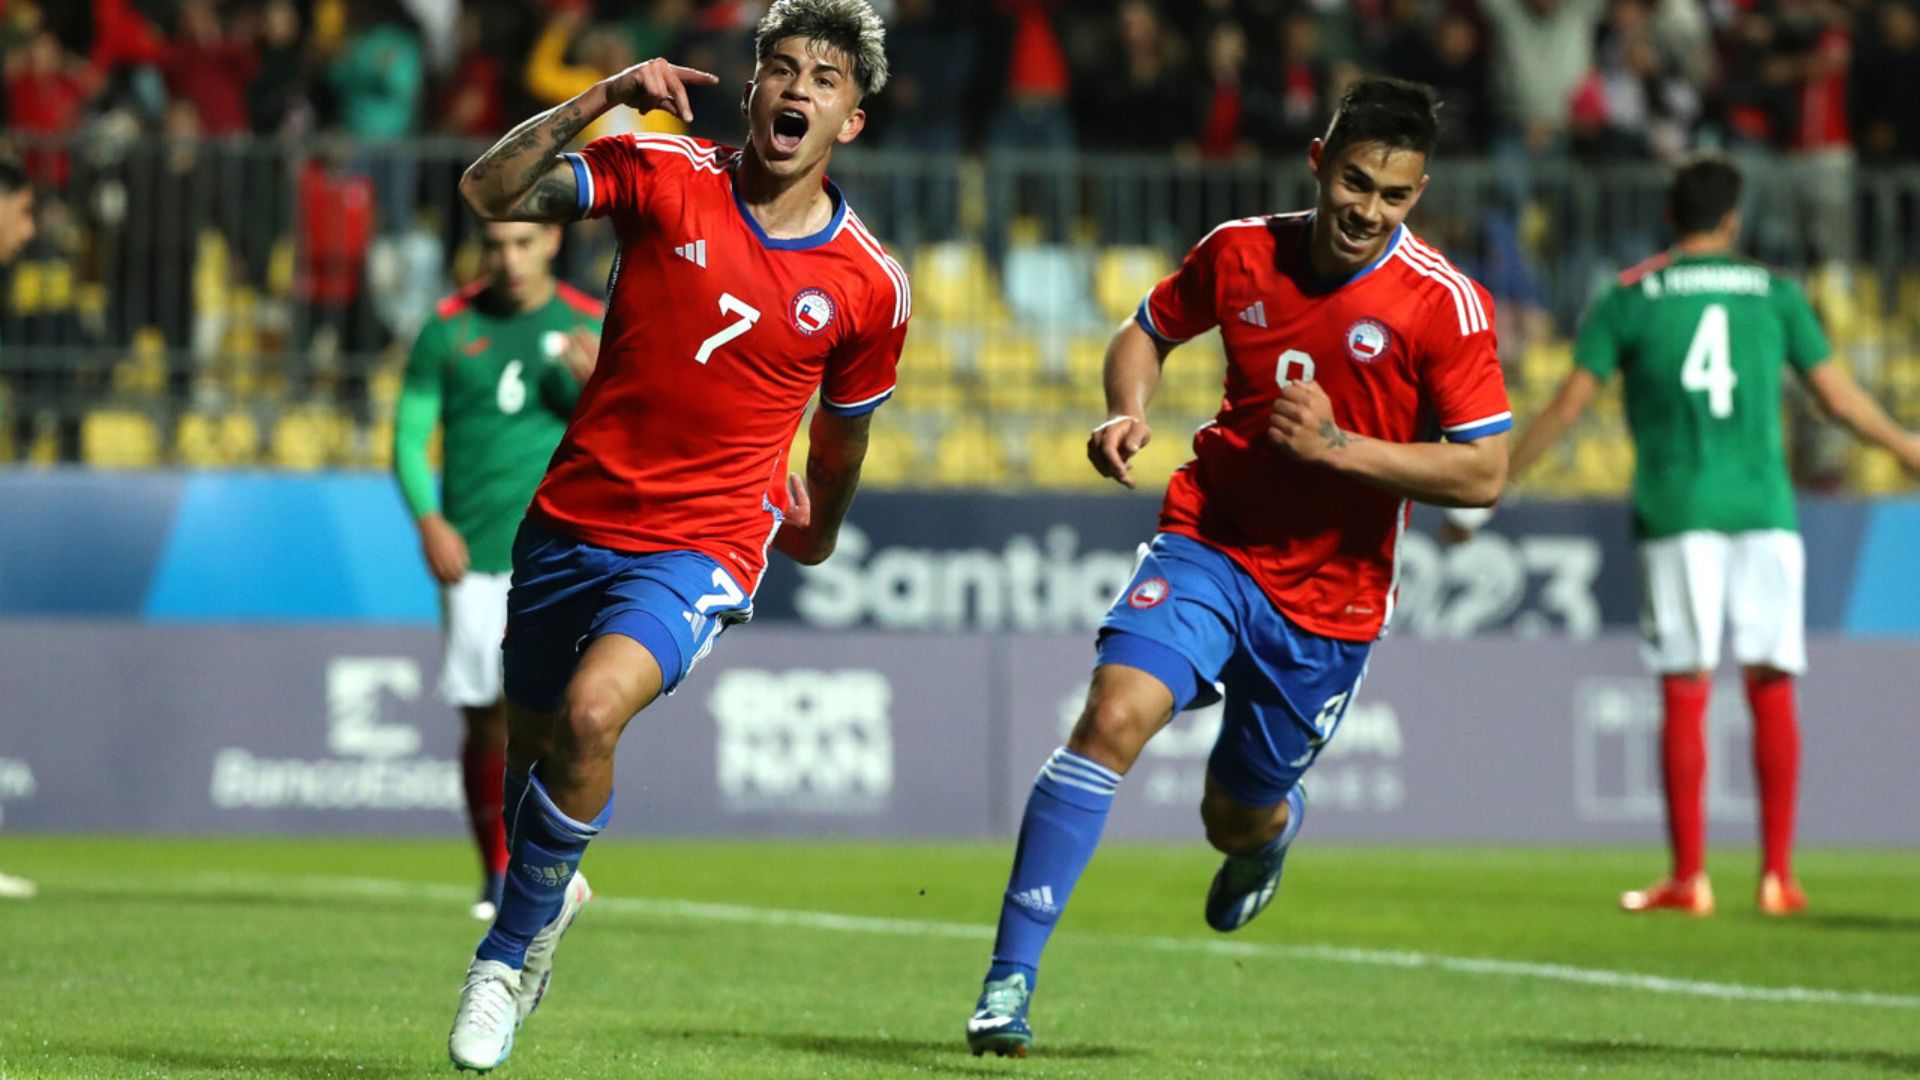 Chile secured tight victory against Mexico in the 2023 Pan American Games